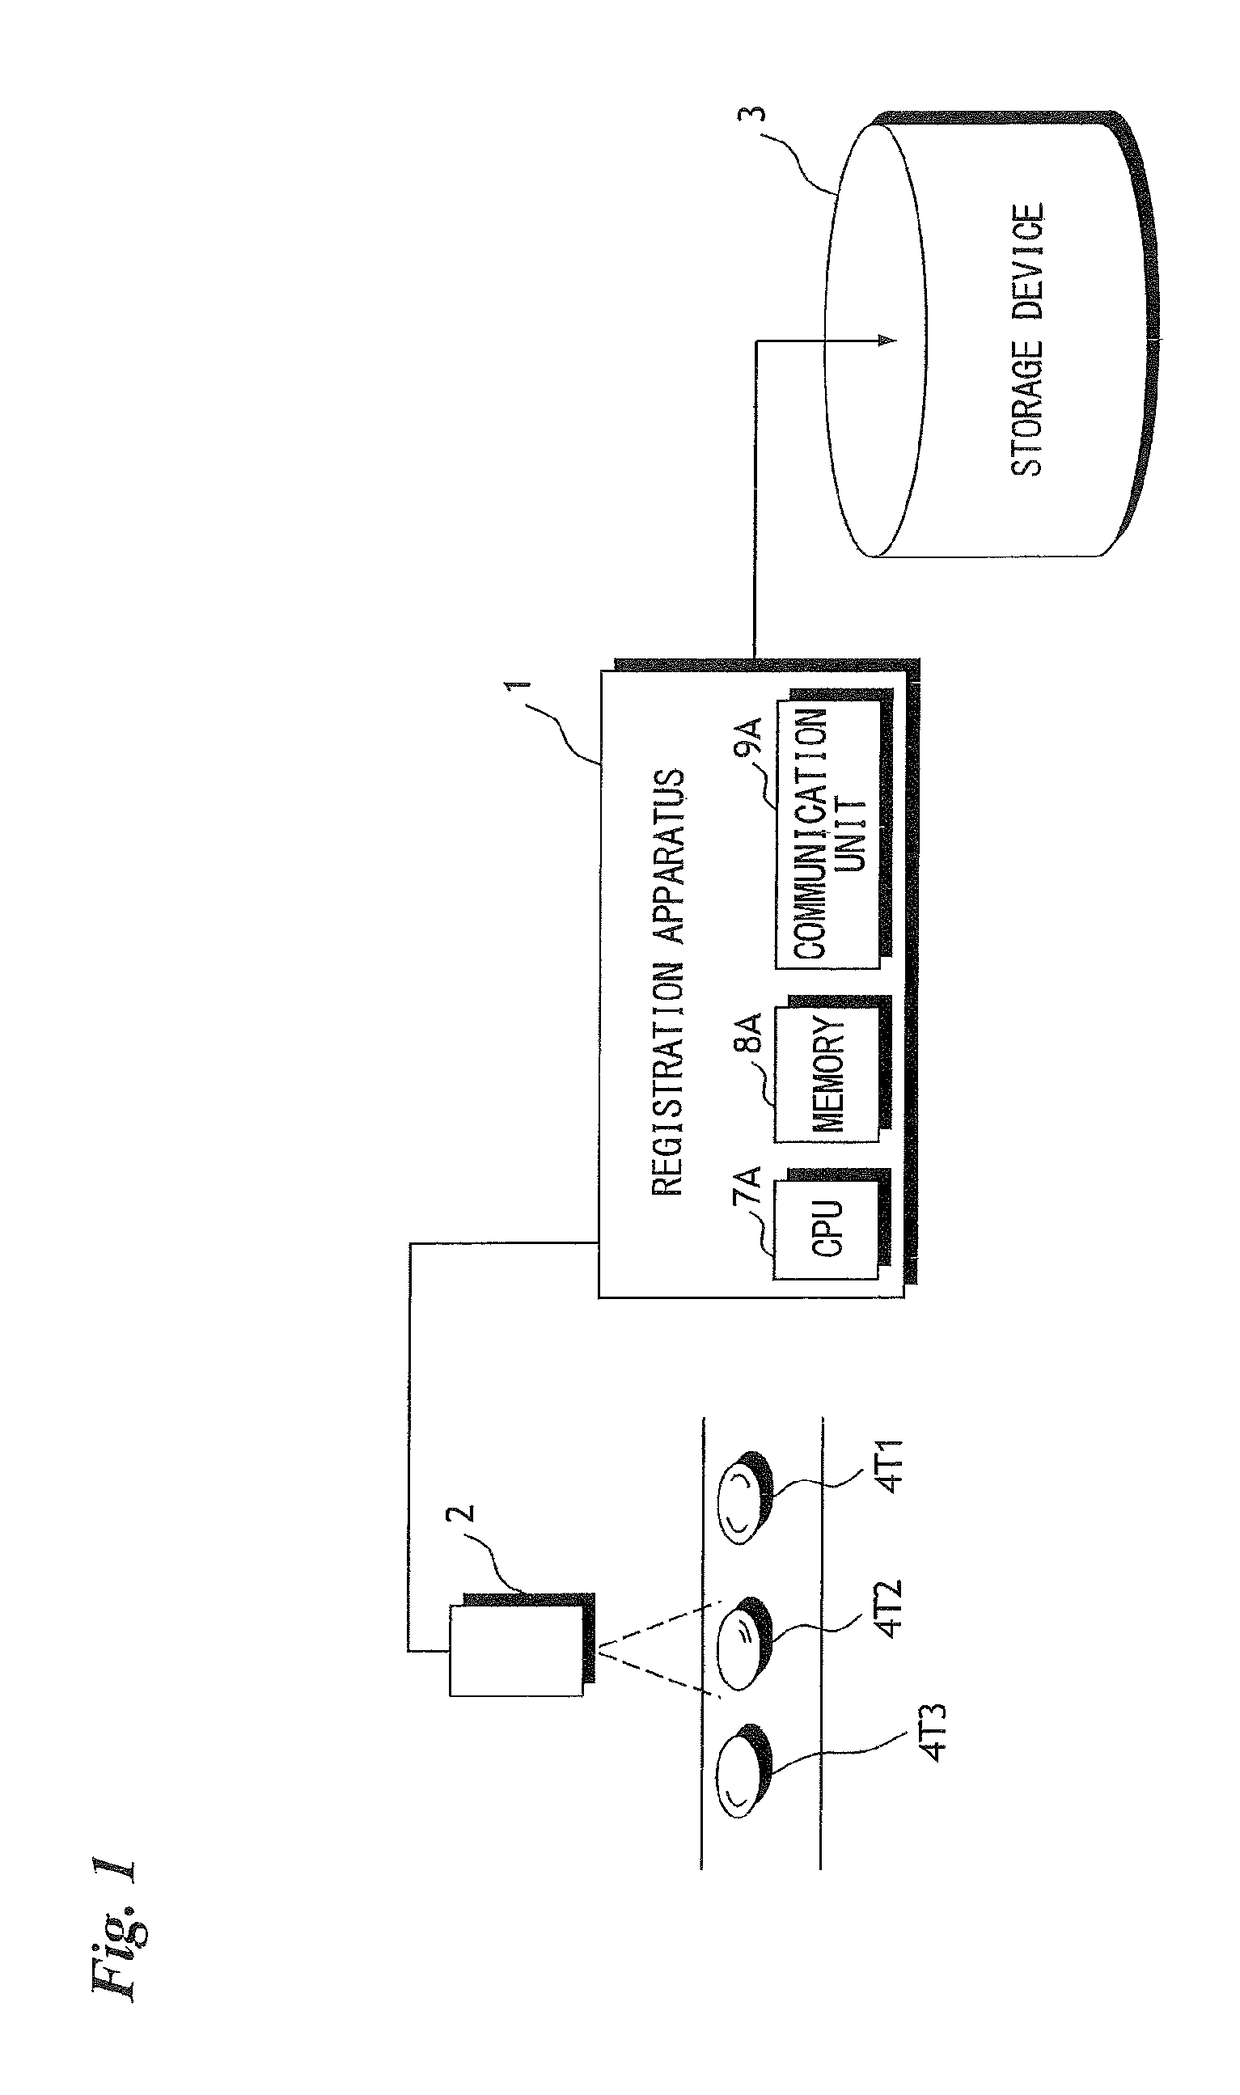 Authenticity determination system, feature point registration apparatus and method of controlling operation of same, and matching determination apparatus and method of controlling operation of same